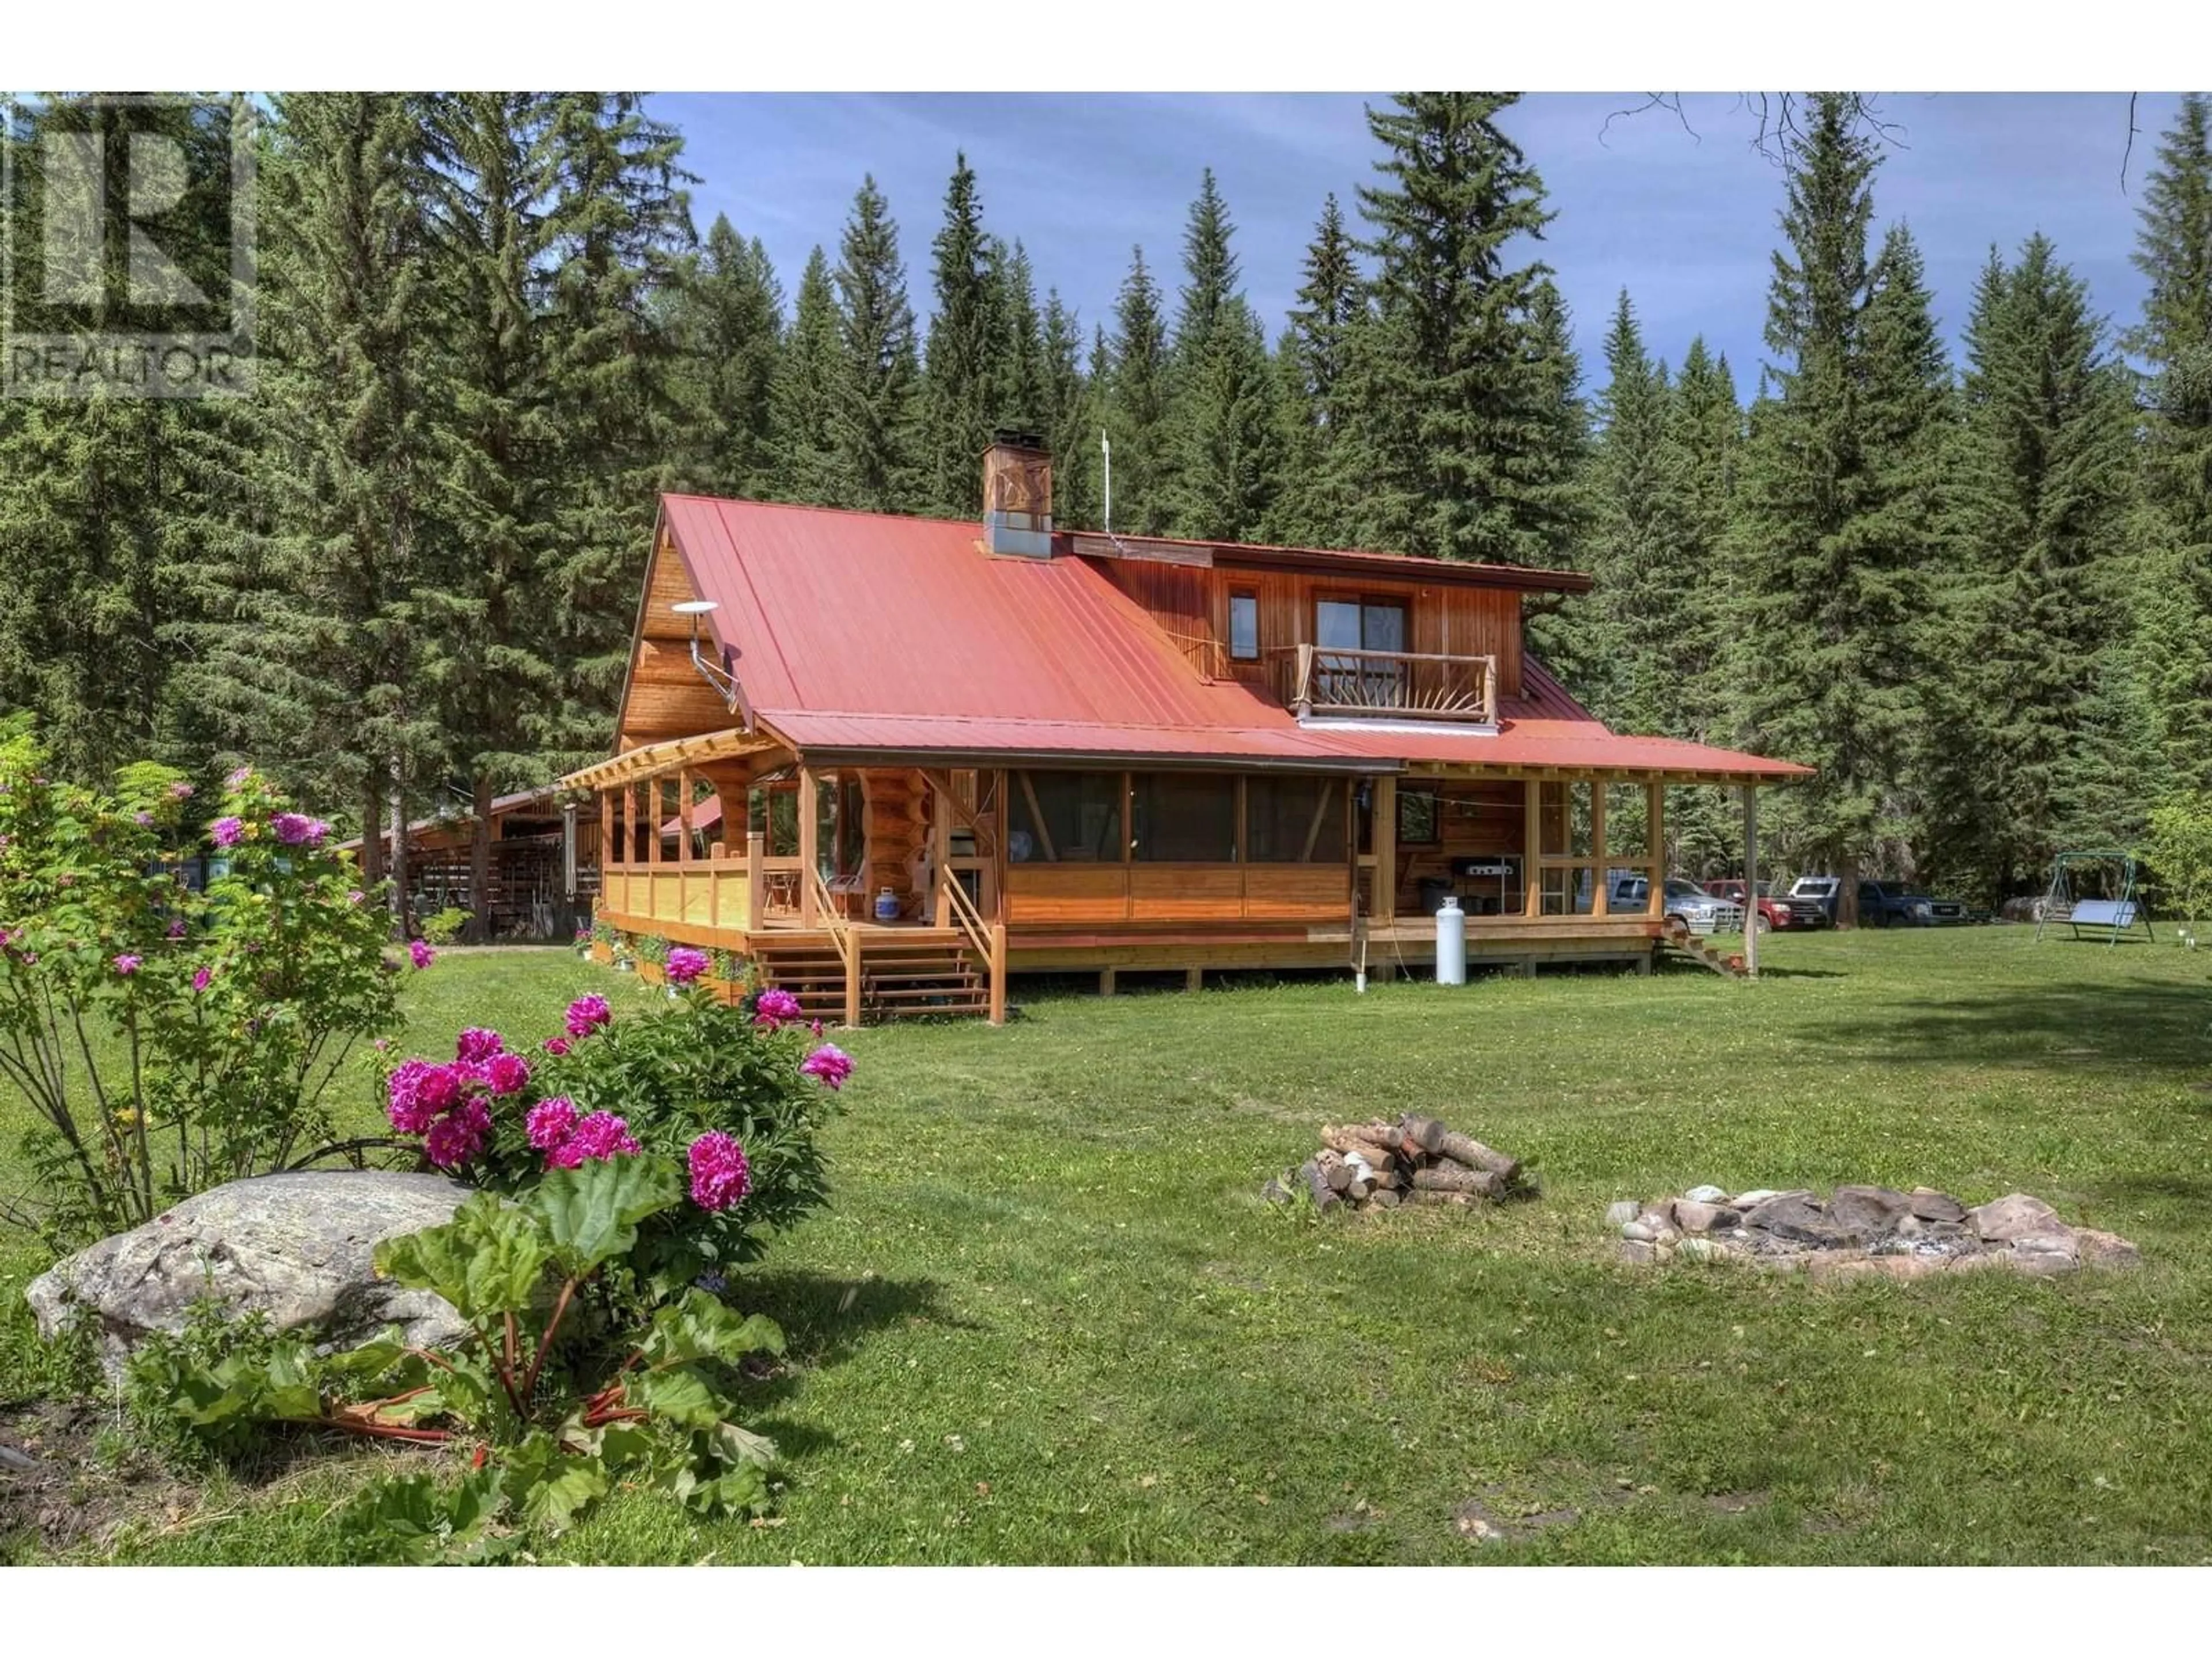 Cottage for 4316 HORSEFLY-QUESNEL LAKE ROAD, Horsefly British Columbia V0L1L0